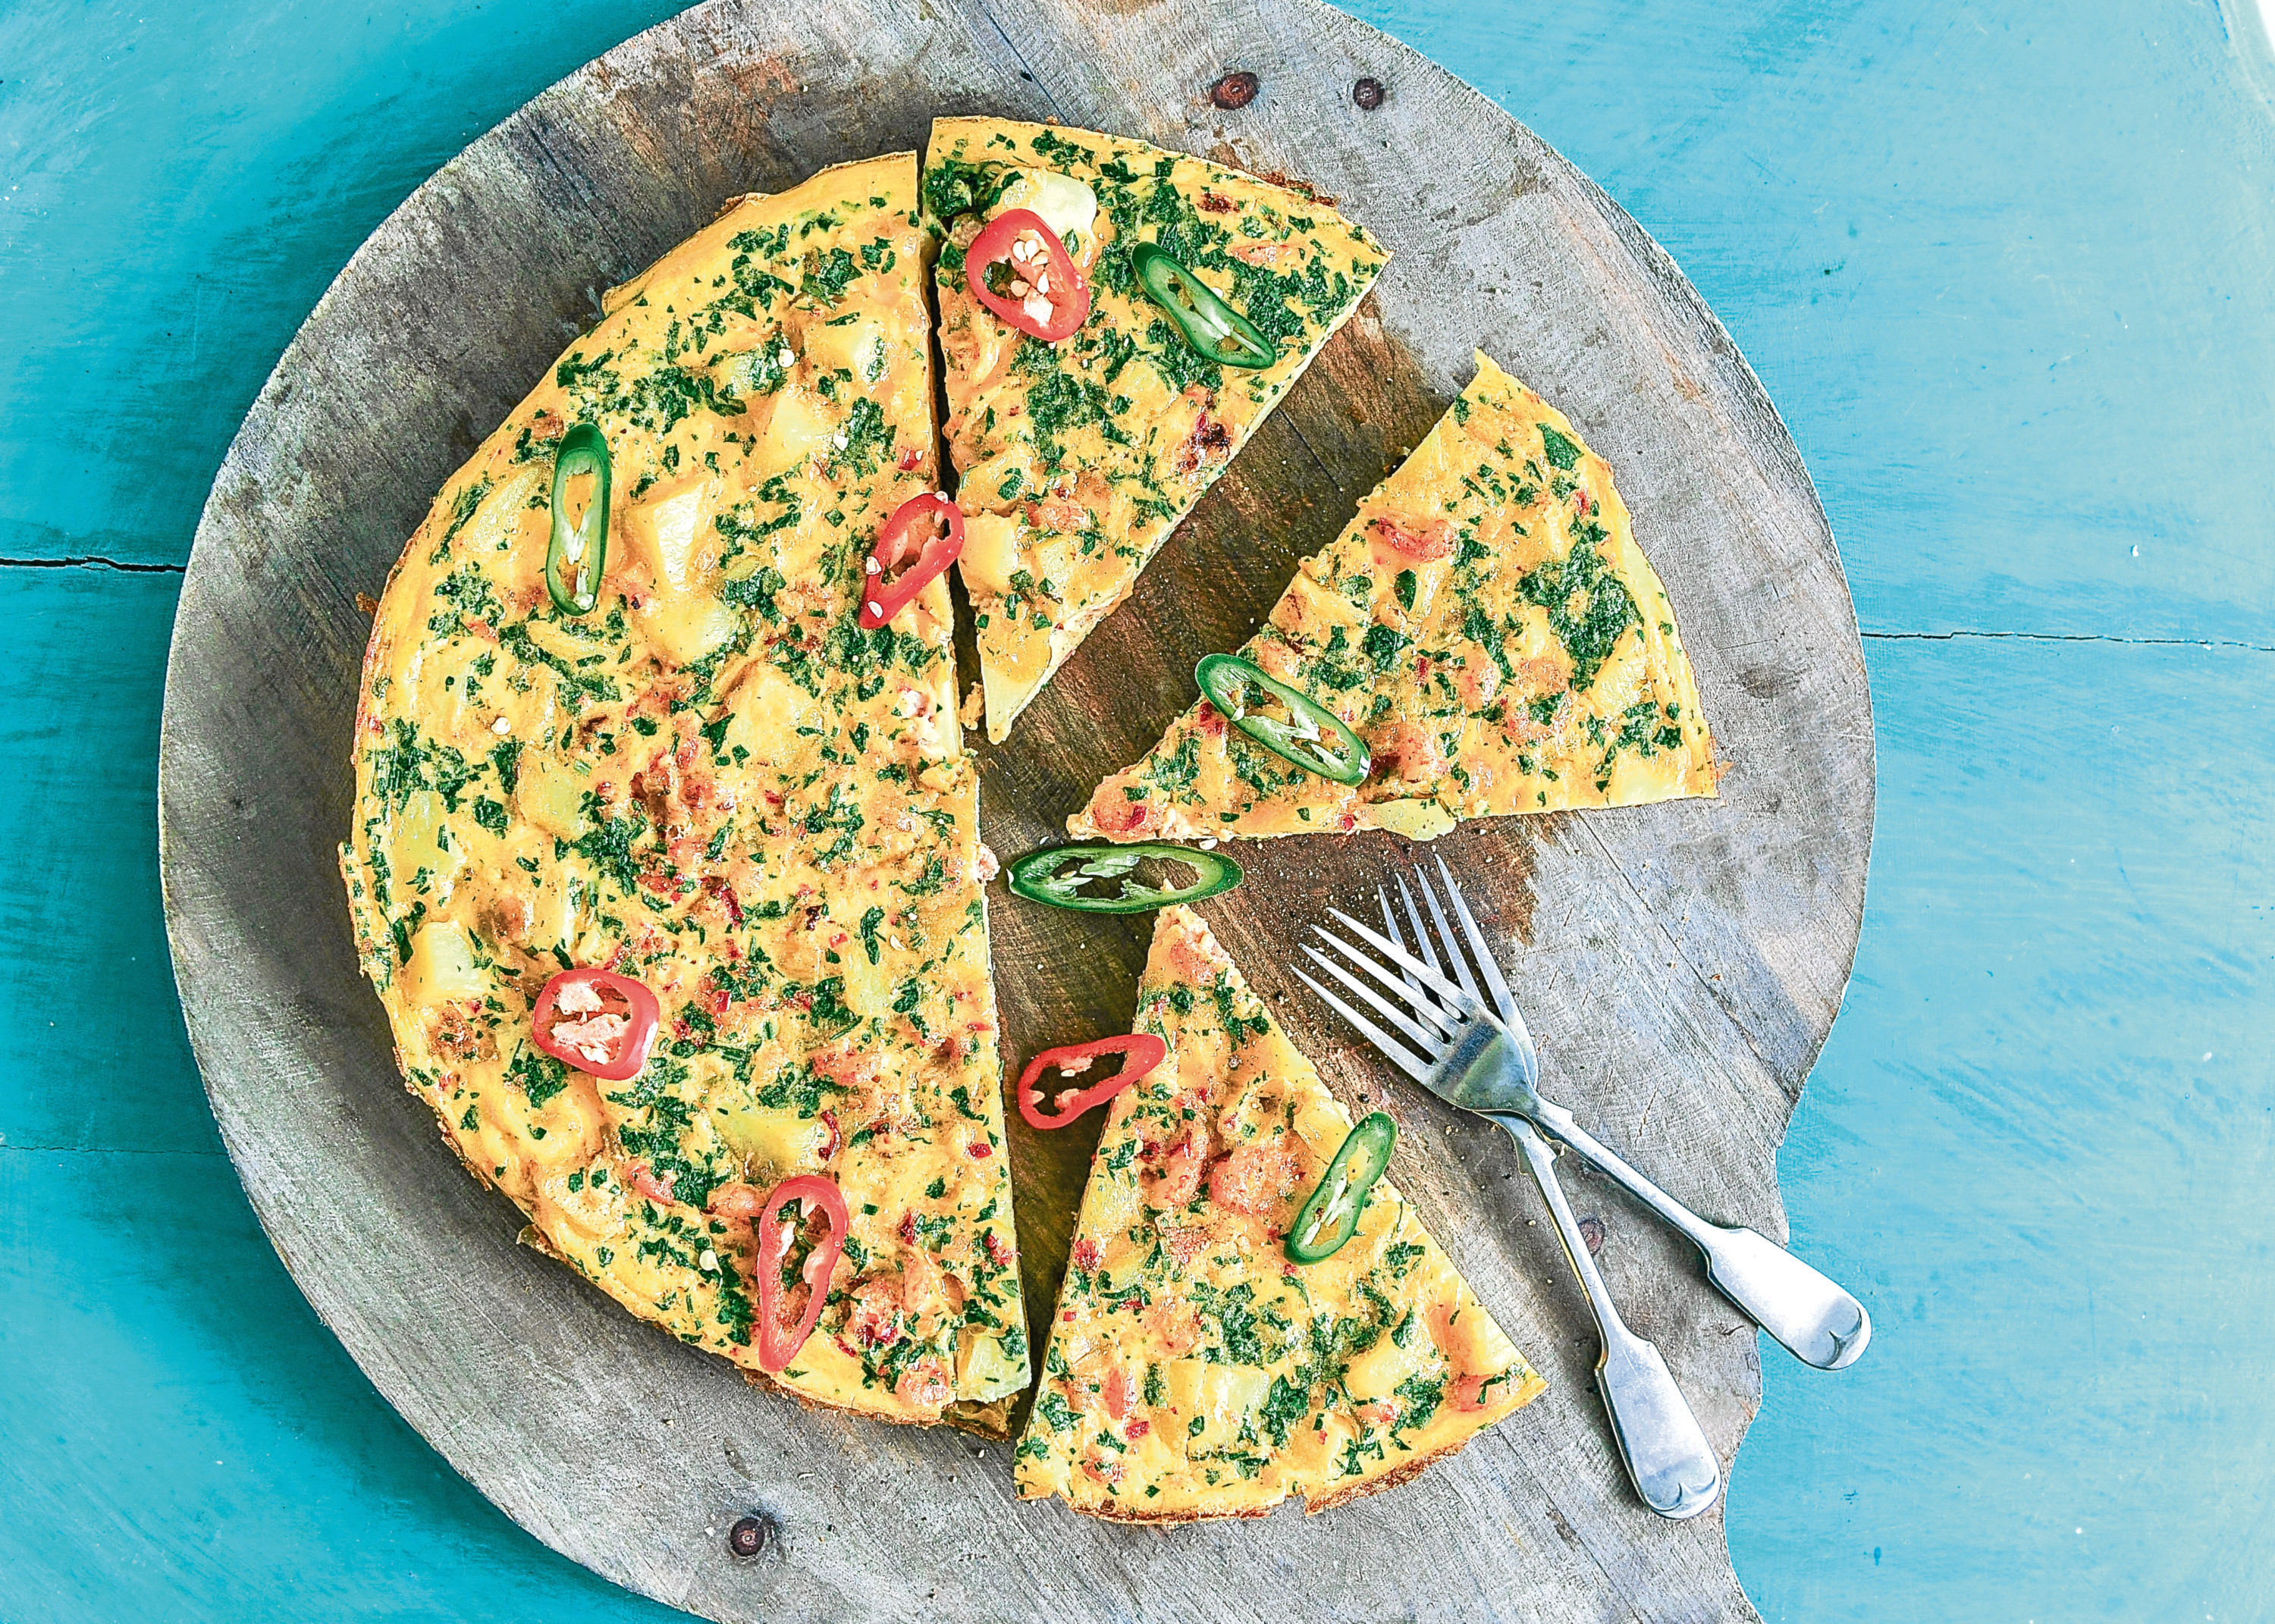 Meals for under £10: Spicy Prawn Frittata - The Sunday Post